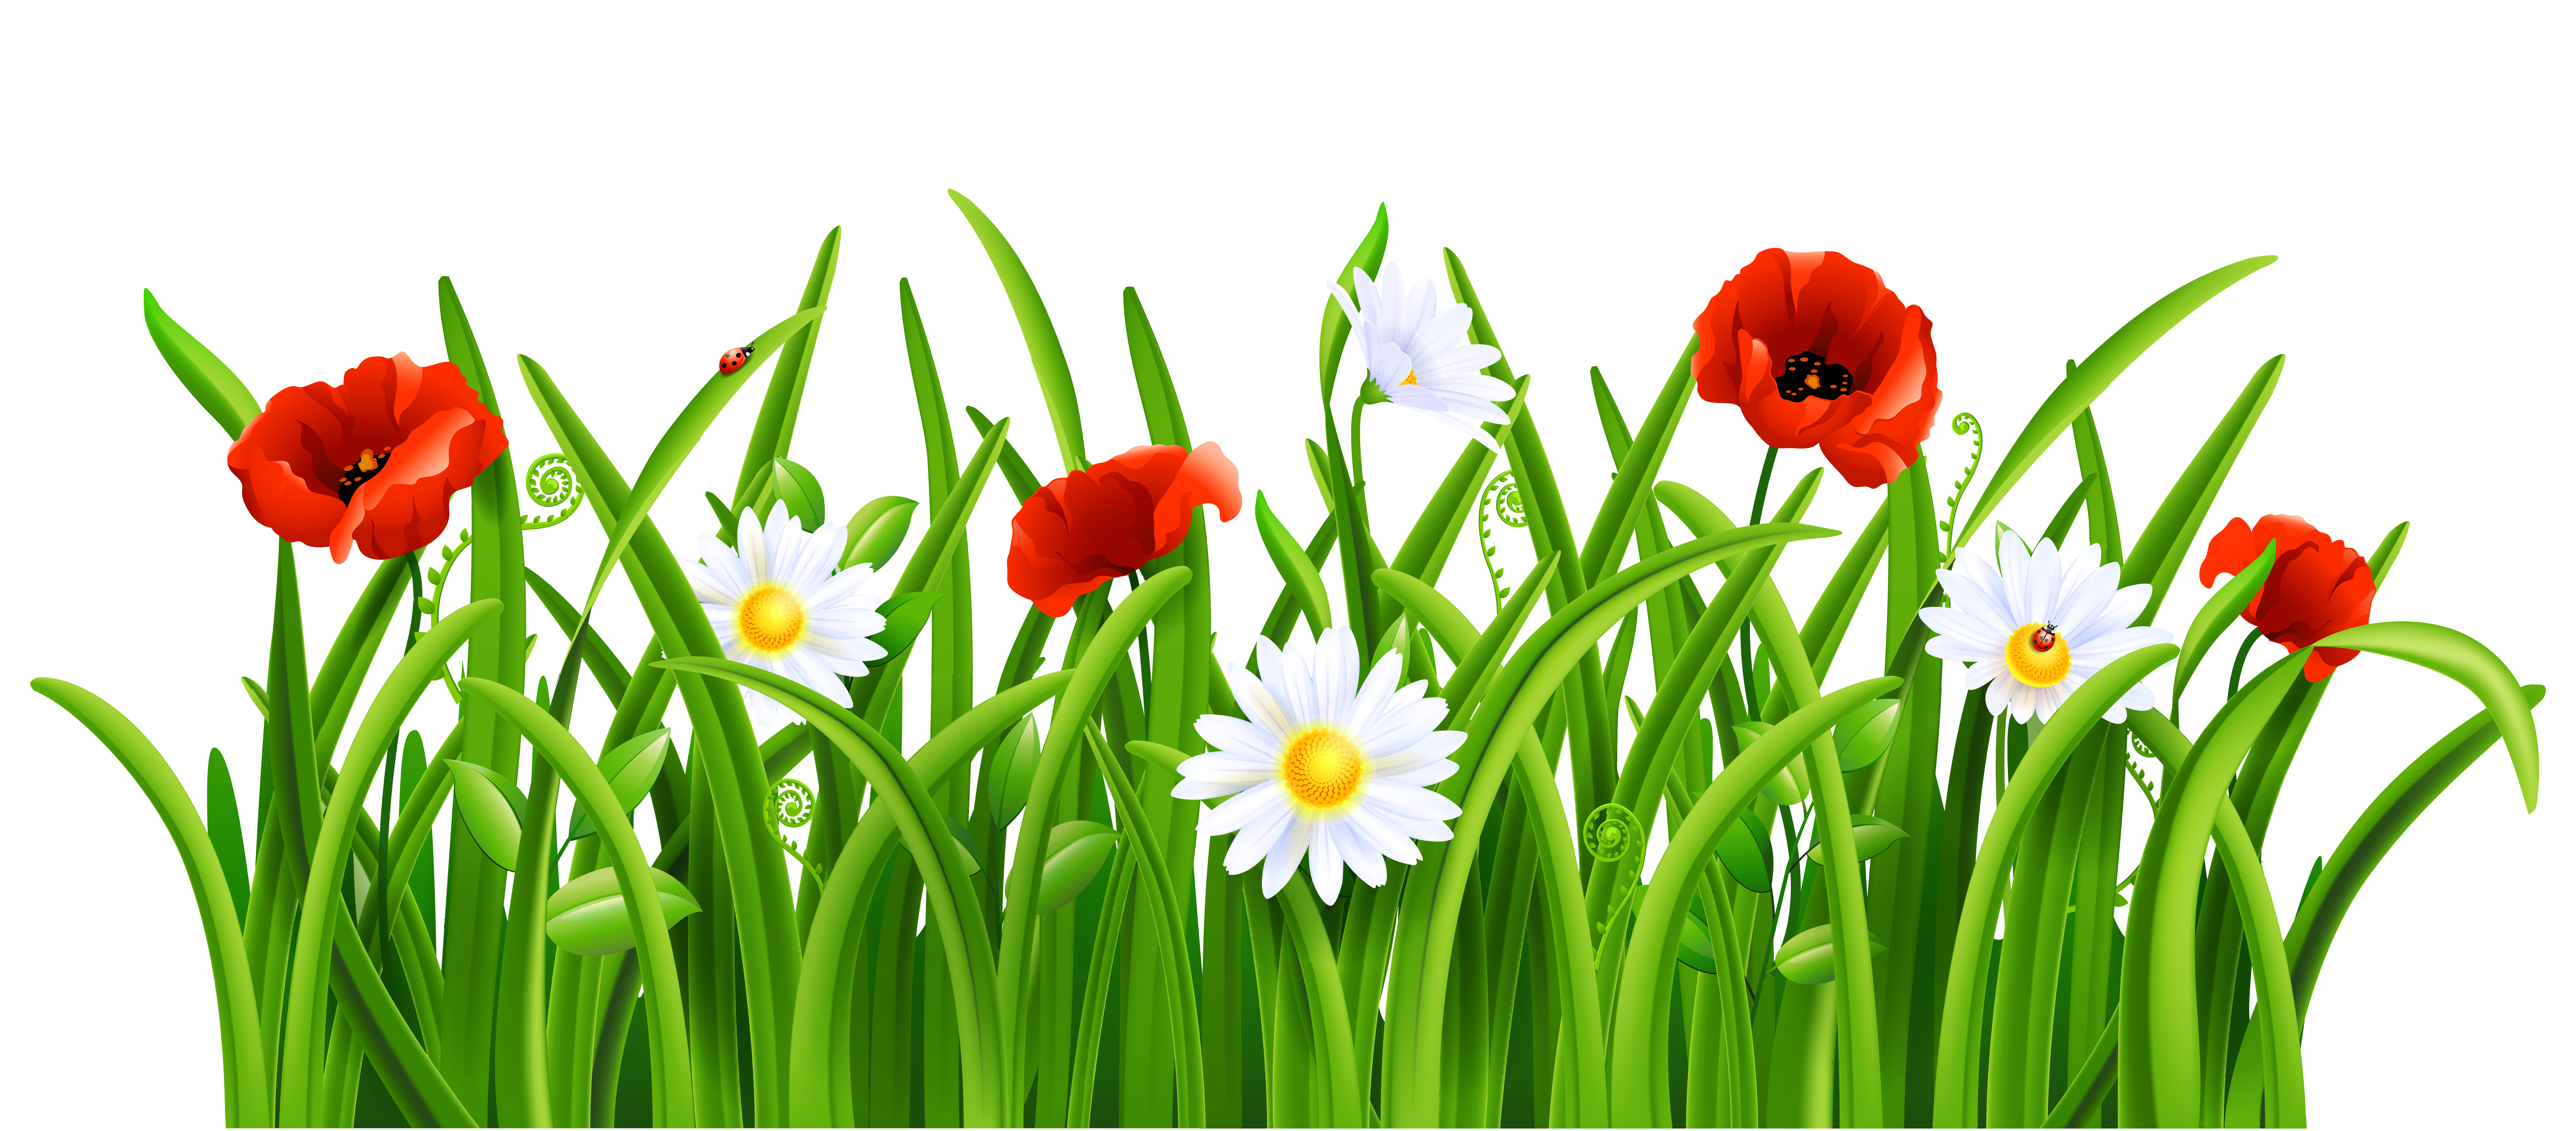 Clipart grass volleyball. Poppies and daisies with